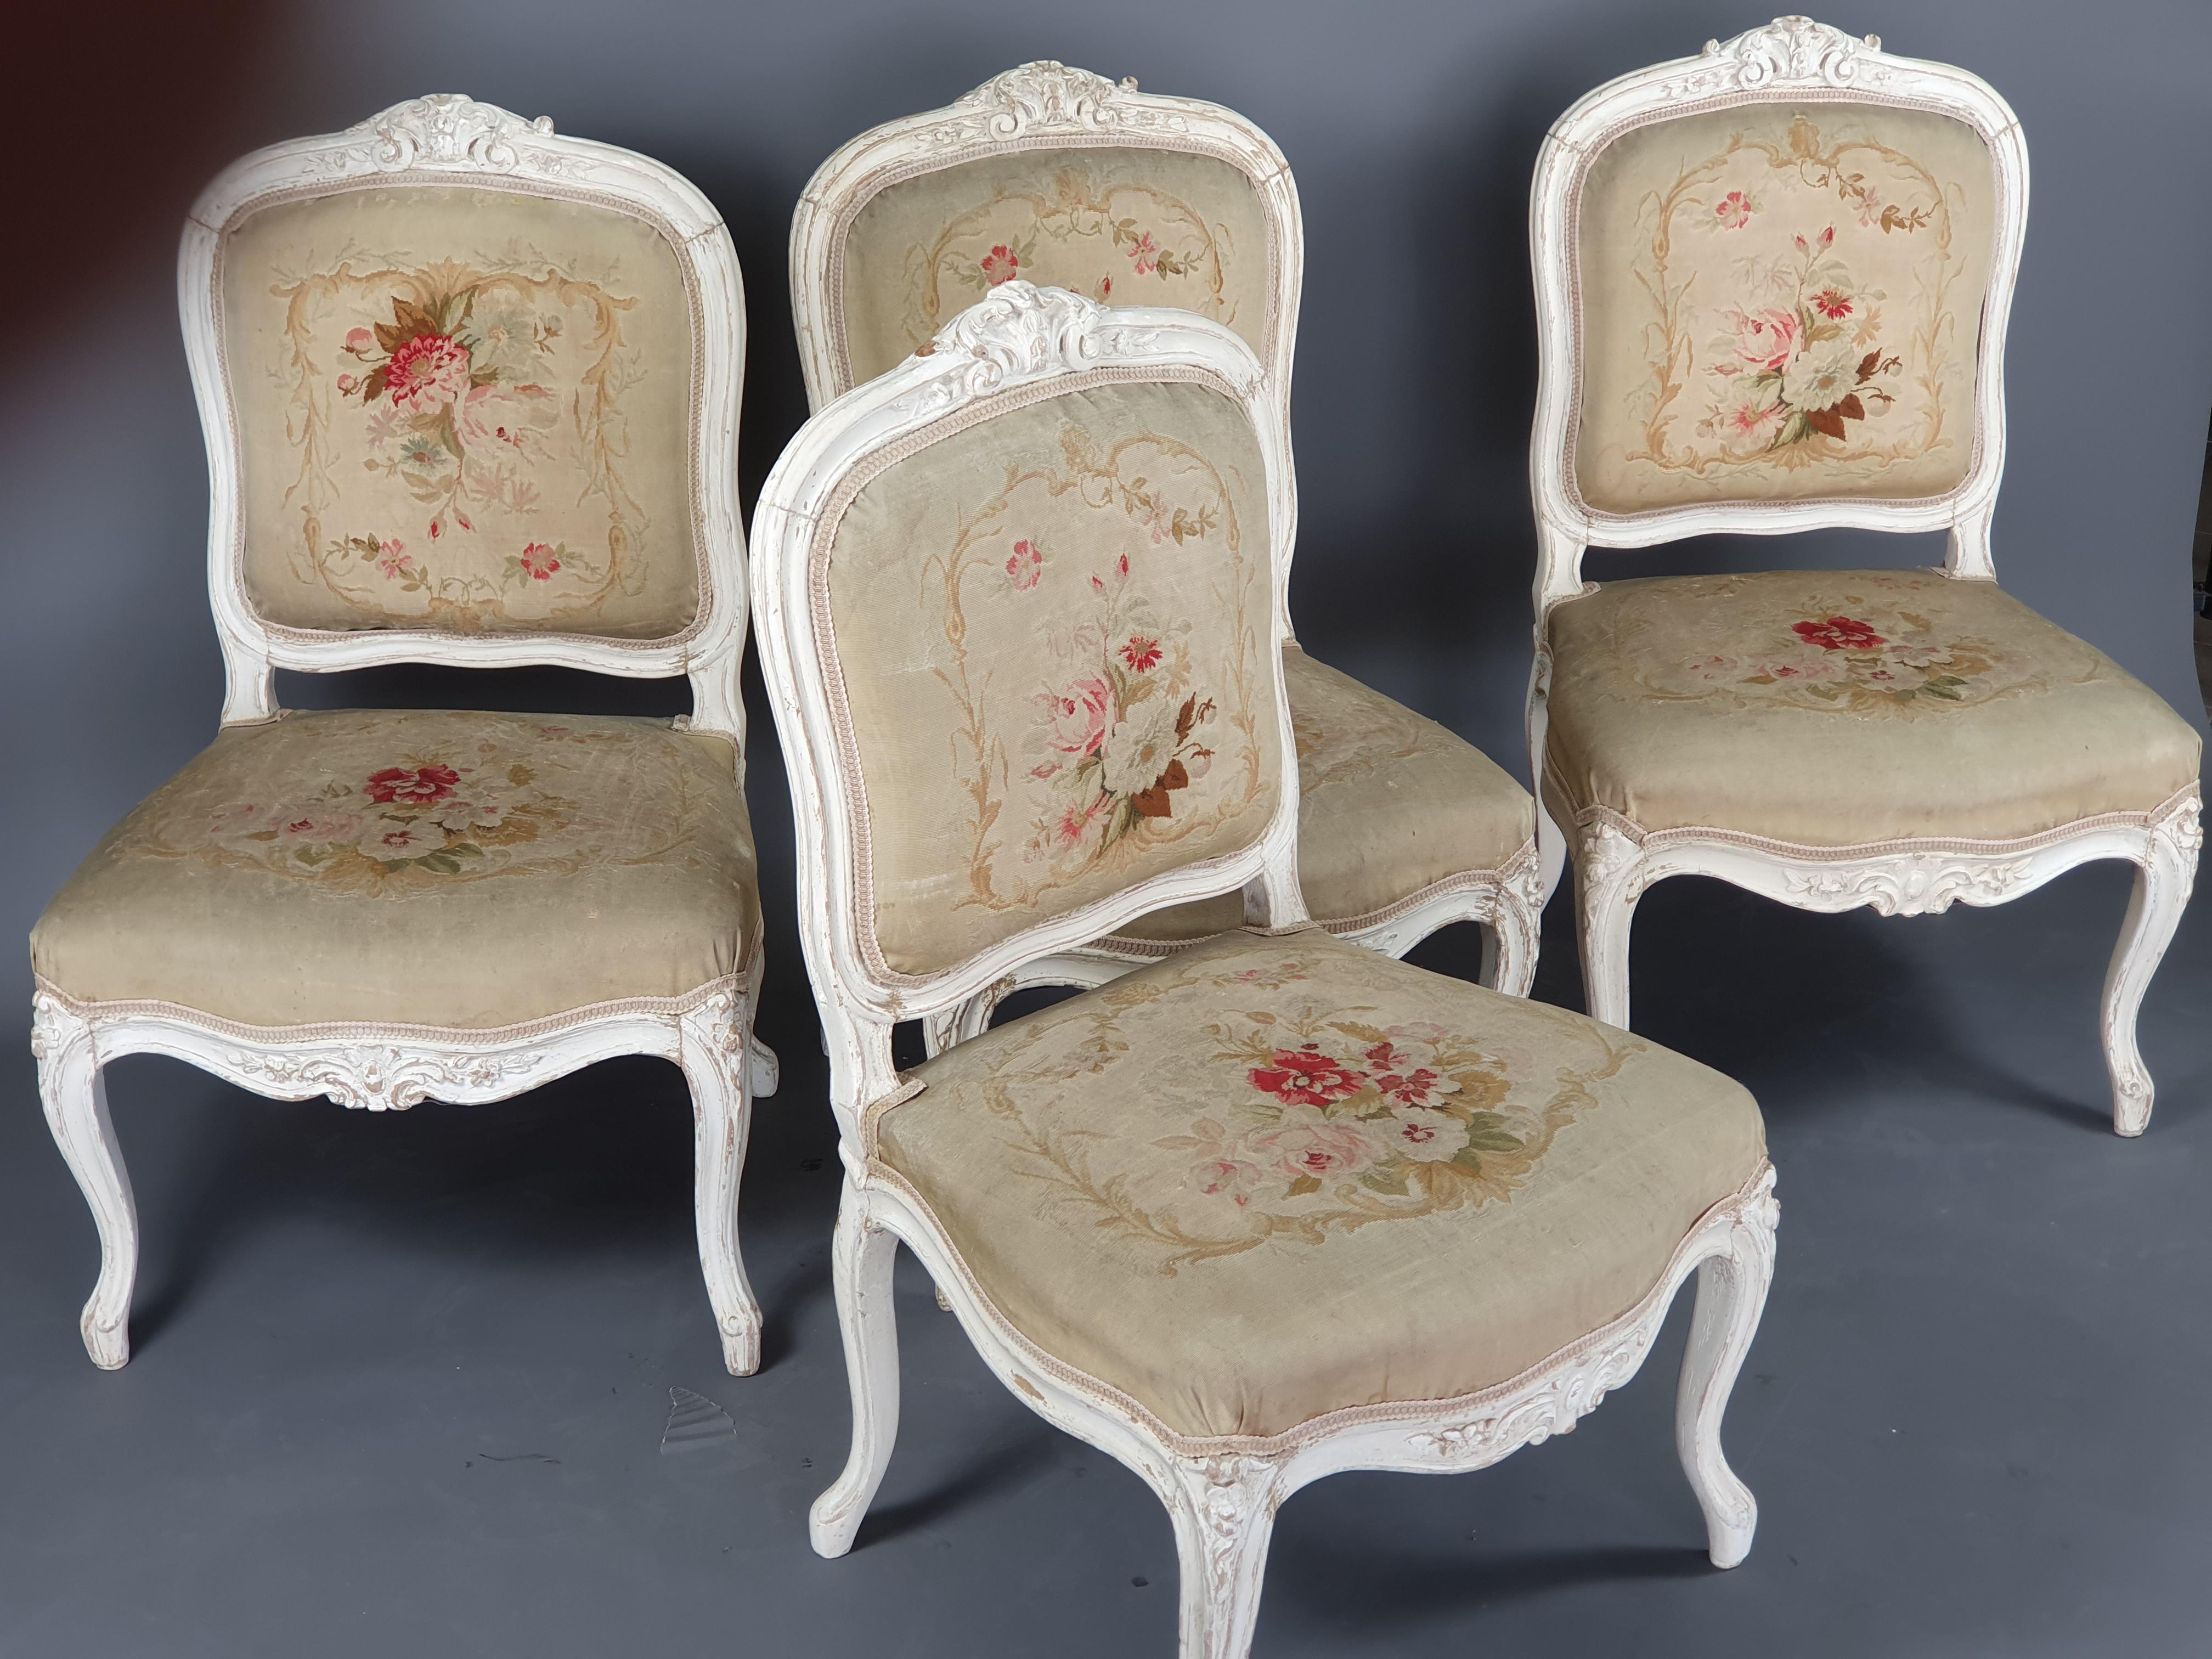 19th Century Suite of Four Louis XV Style Fireside Chairs in Lacquered Wood and Aubusson Tape